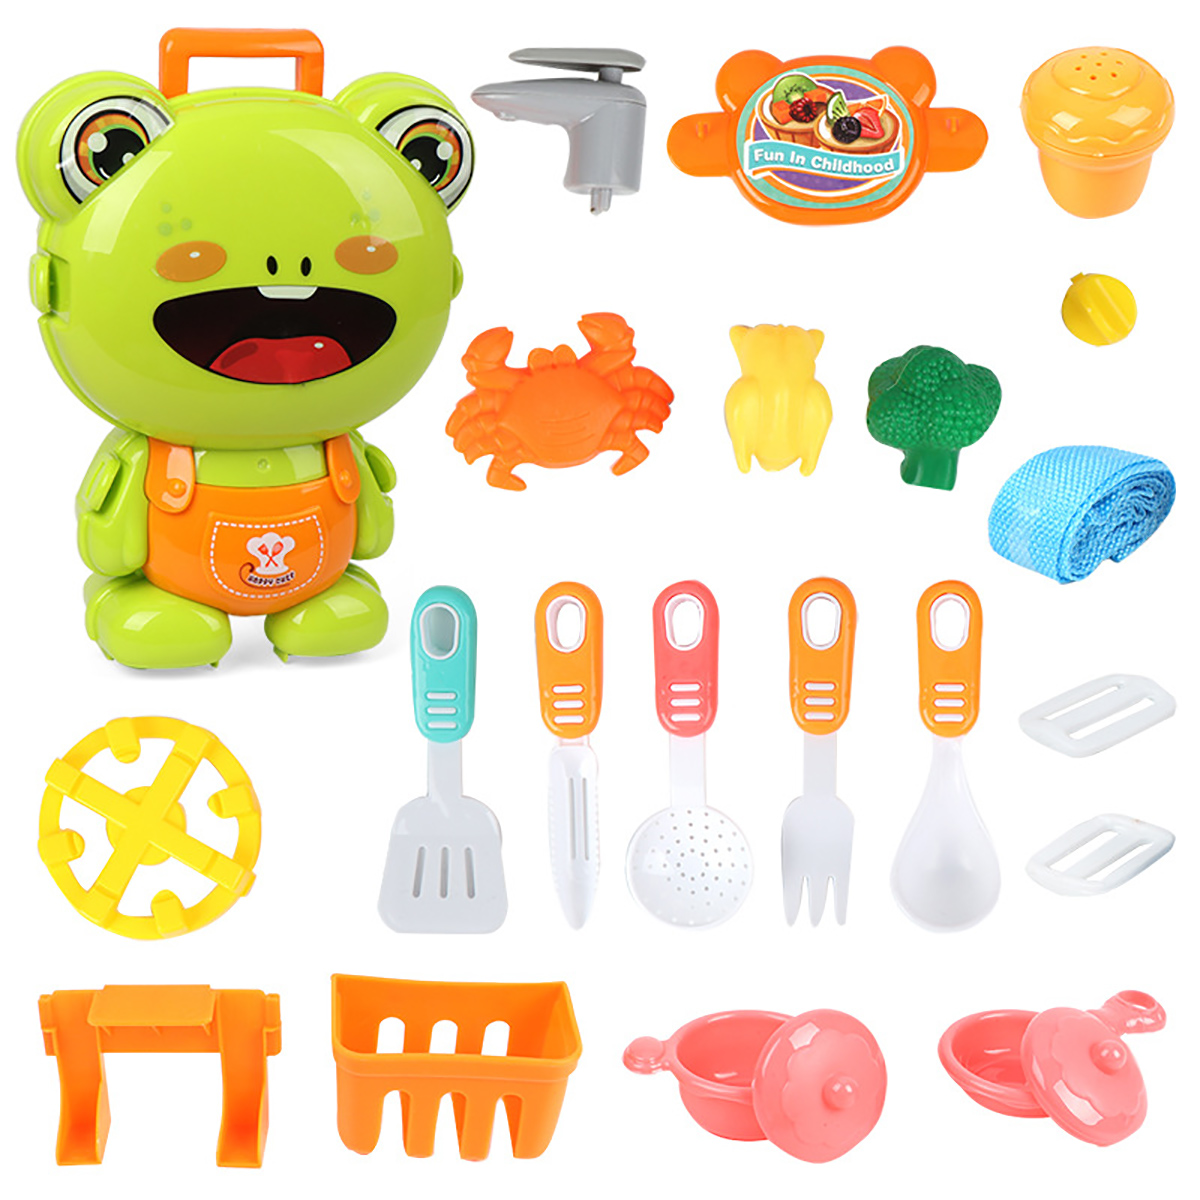 Simulation-Kids-Kitchen-Cooking-Tools-Doctors-Makeup-Playing-Education-Pretend-Toy-Set-with-Carrying-1725293-9